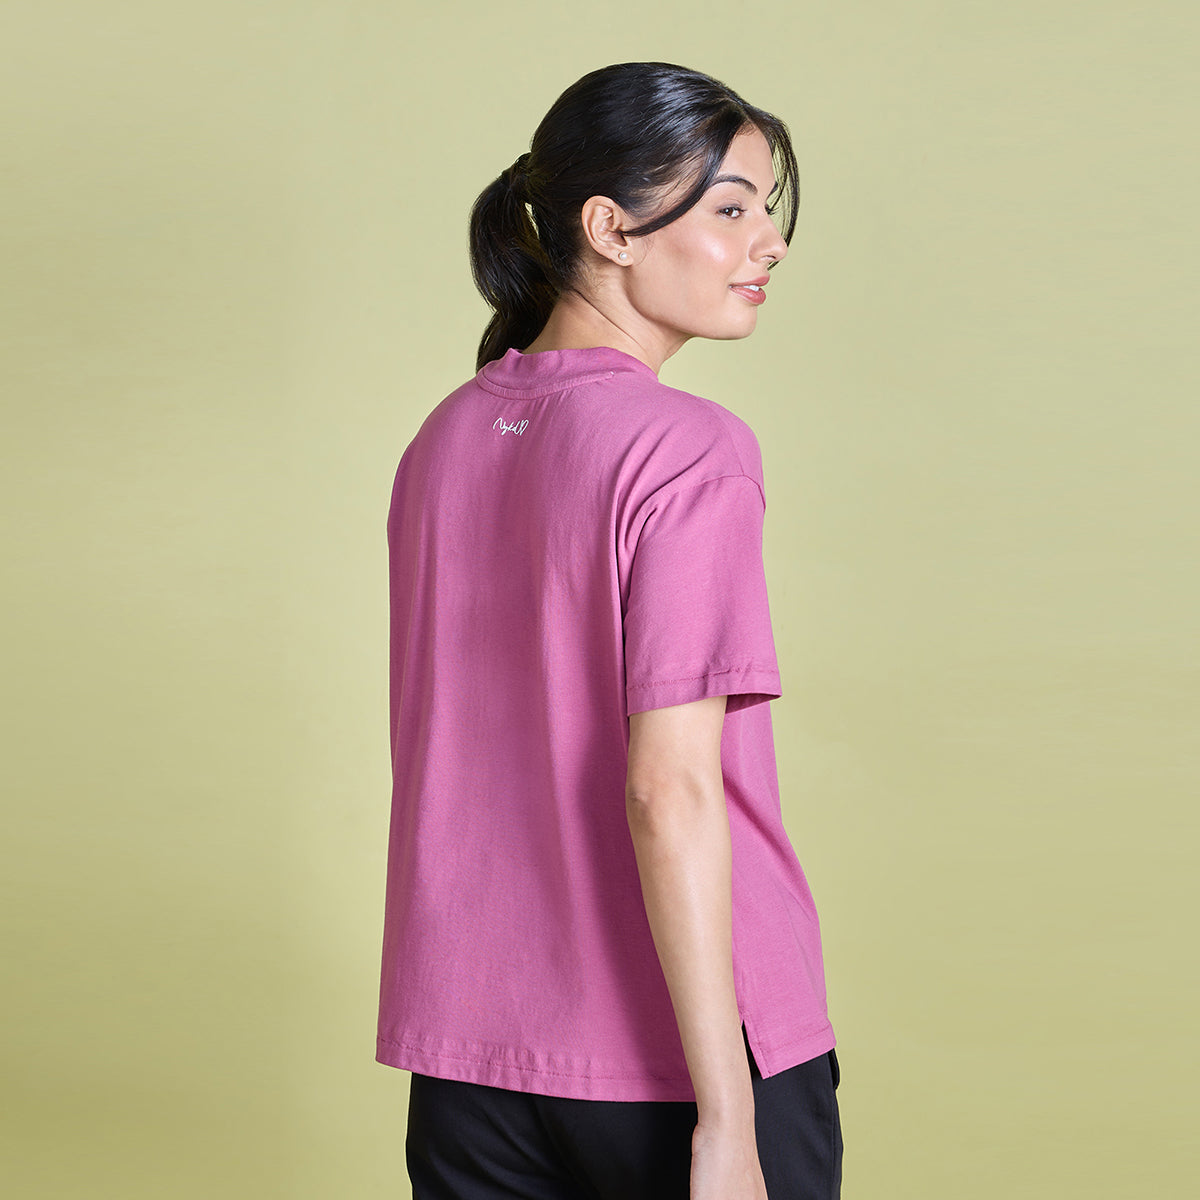 Nykd All Day Iconic Cotton Boxy Tee - NYLE276 - Red violet